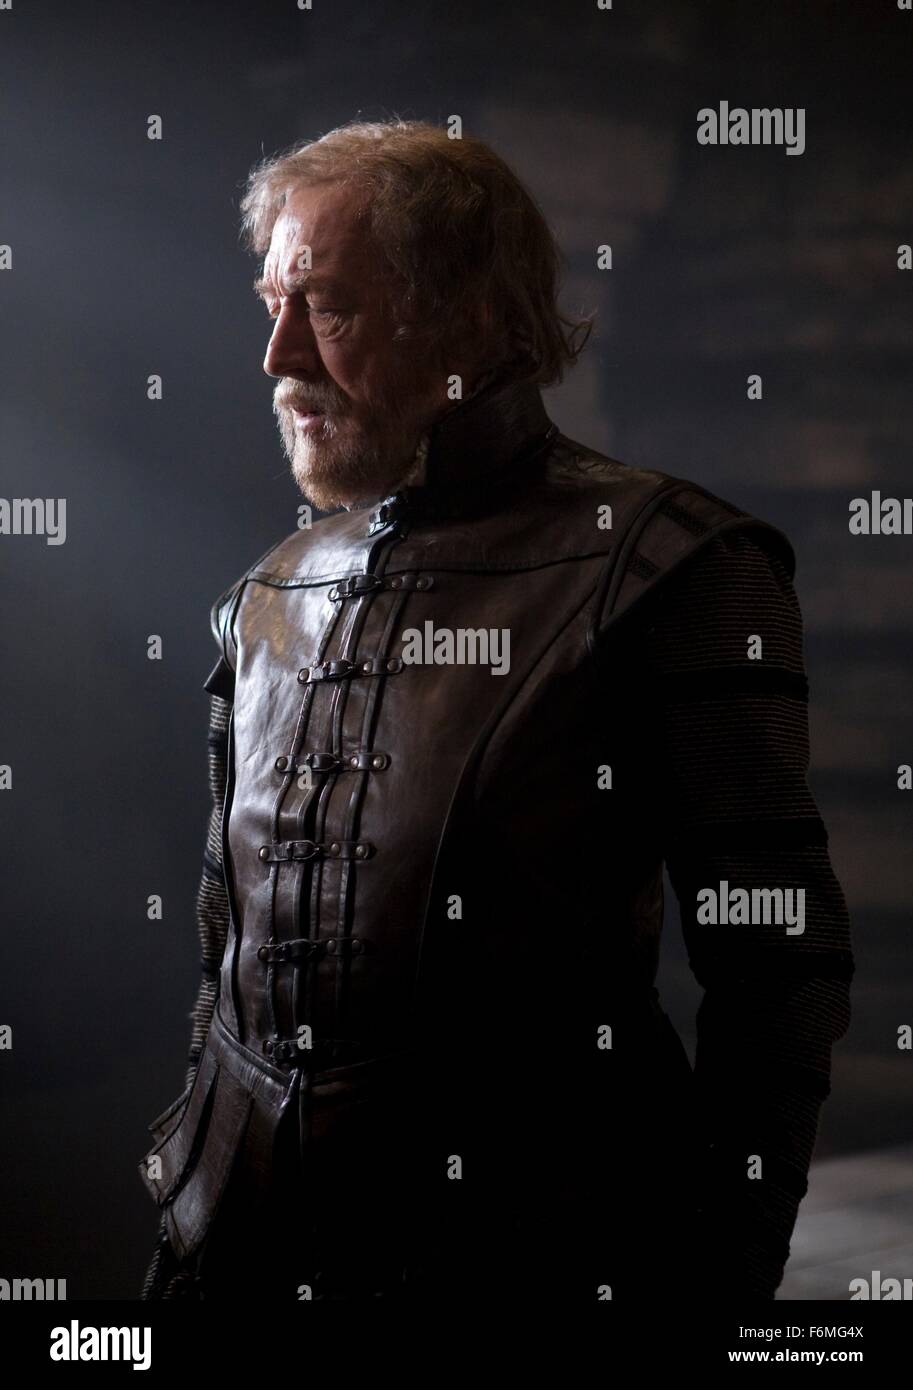 RELEASE DATE: 23 December 2009. MOVIE TITLE: Solomon Kane. STUDIO:  Davis-Films. PLOT: A mercenary who owes his soul to the devil redeems  himself by fighting evil. PICTURED: MAX VON SYDOW as Josiah